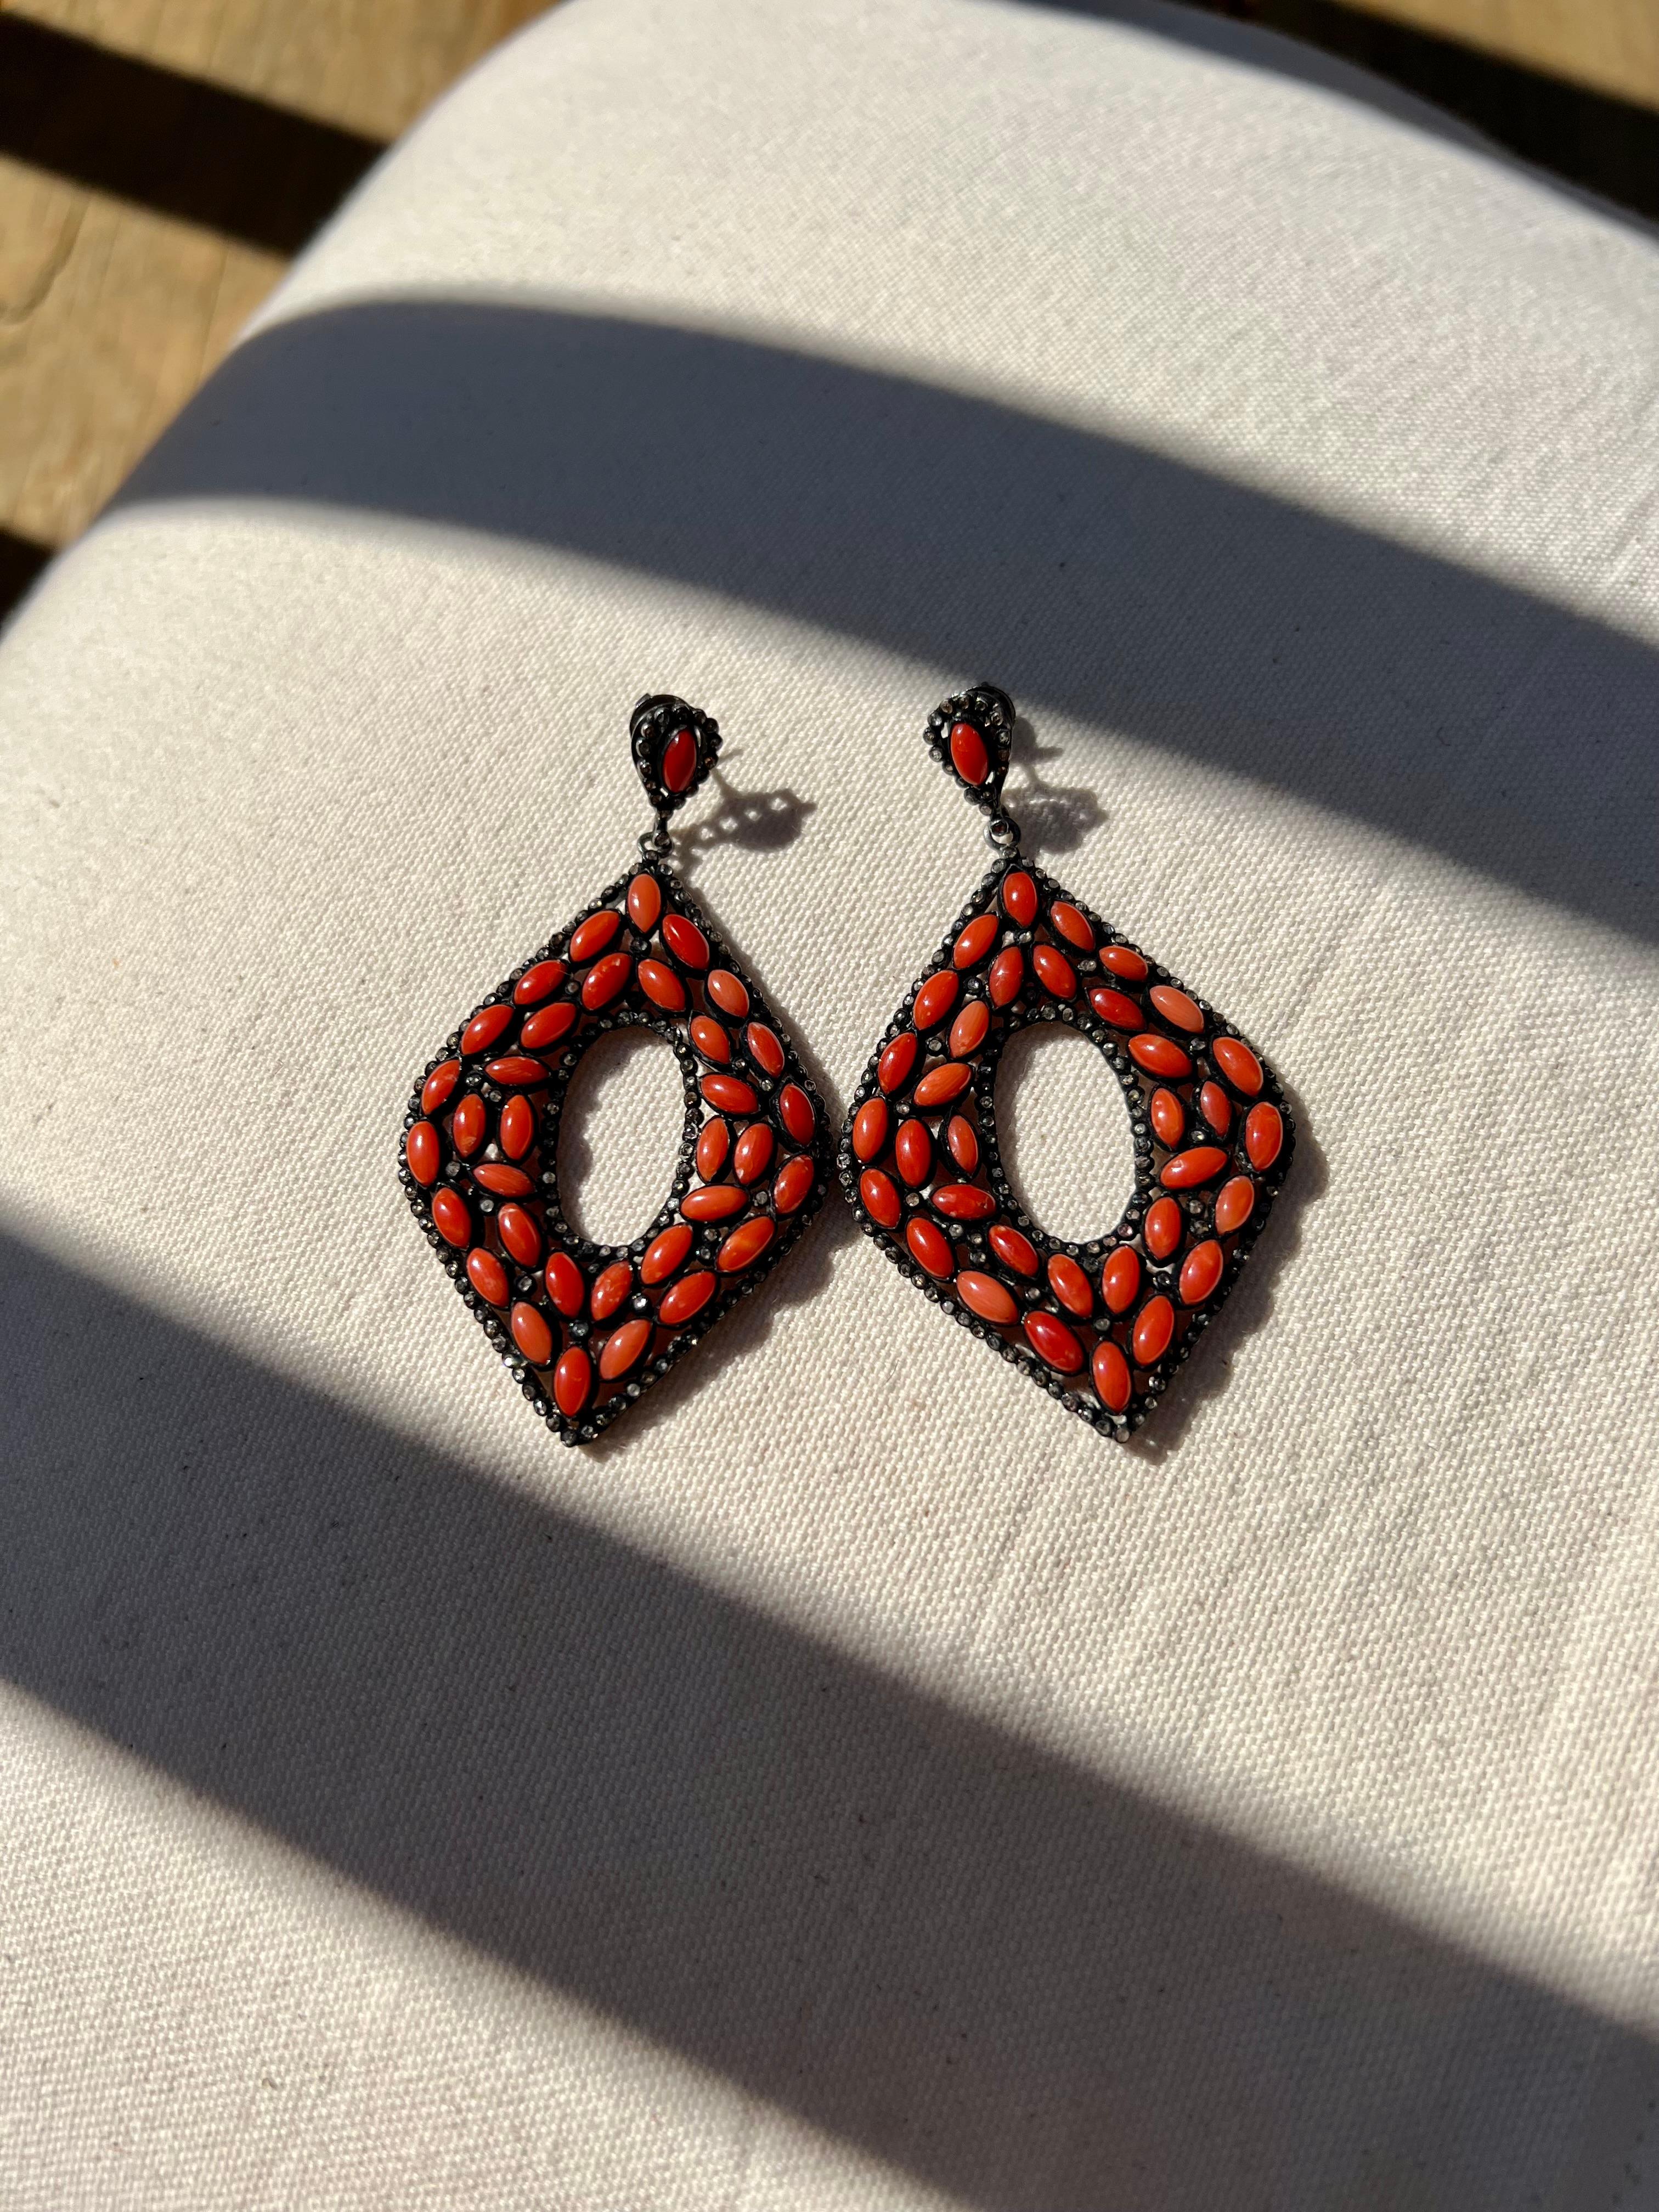 One pair of oxidized sterling silver dangle earrings set with seventy (70) 6x3mm oval oxblood coral stones and two hundred ninety-six rose cut diamonds.  The earrings measure 70mm long and are 39mm wide complete with friction posts and backs.  